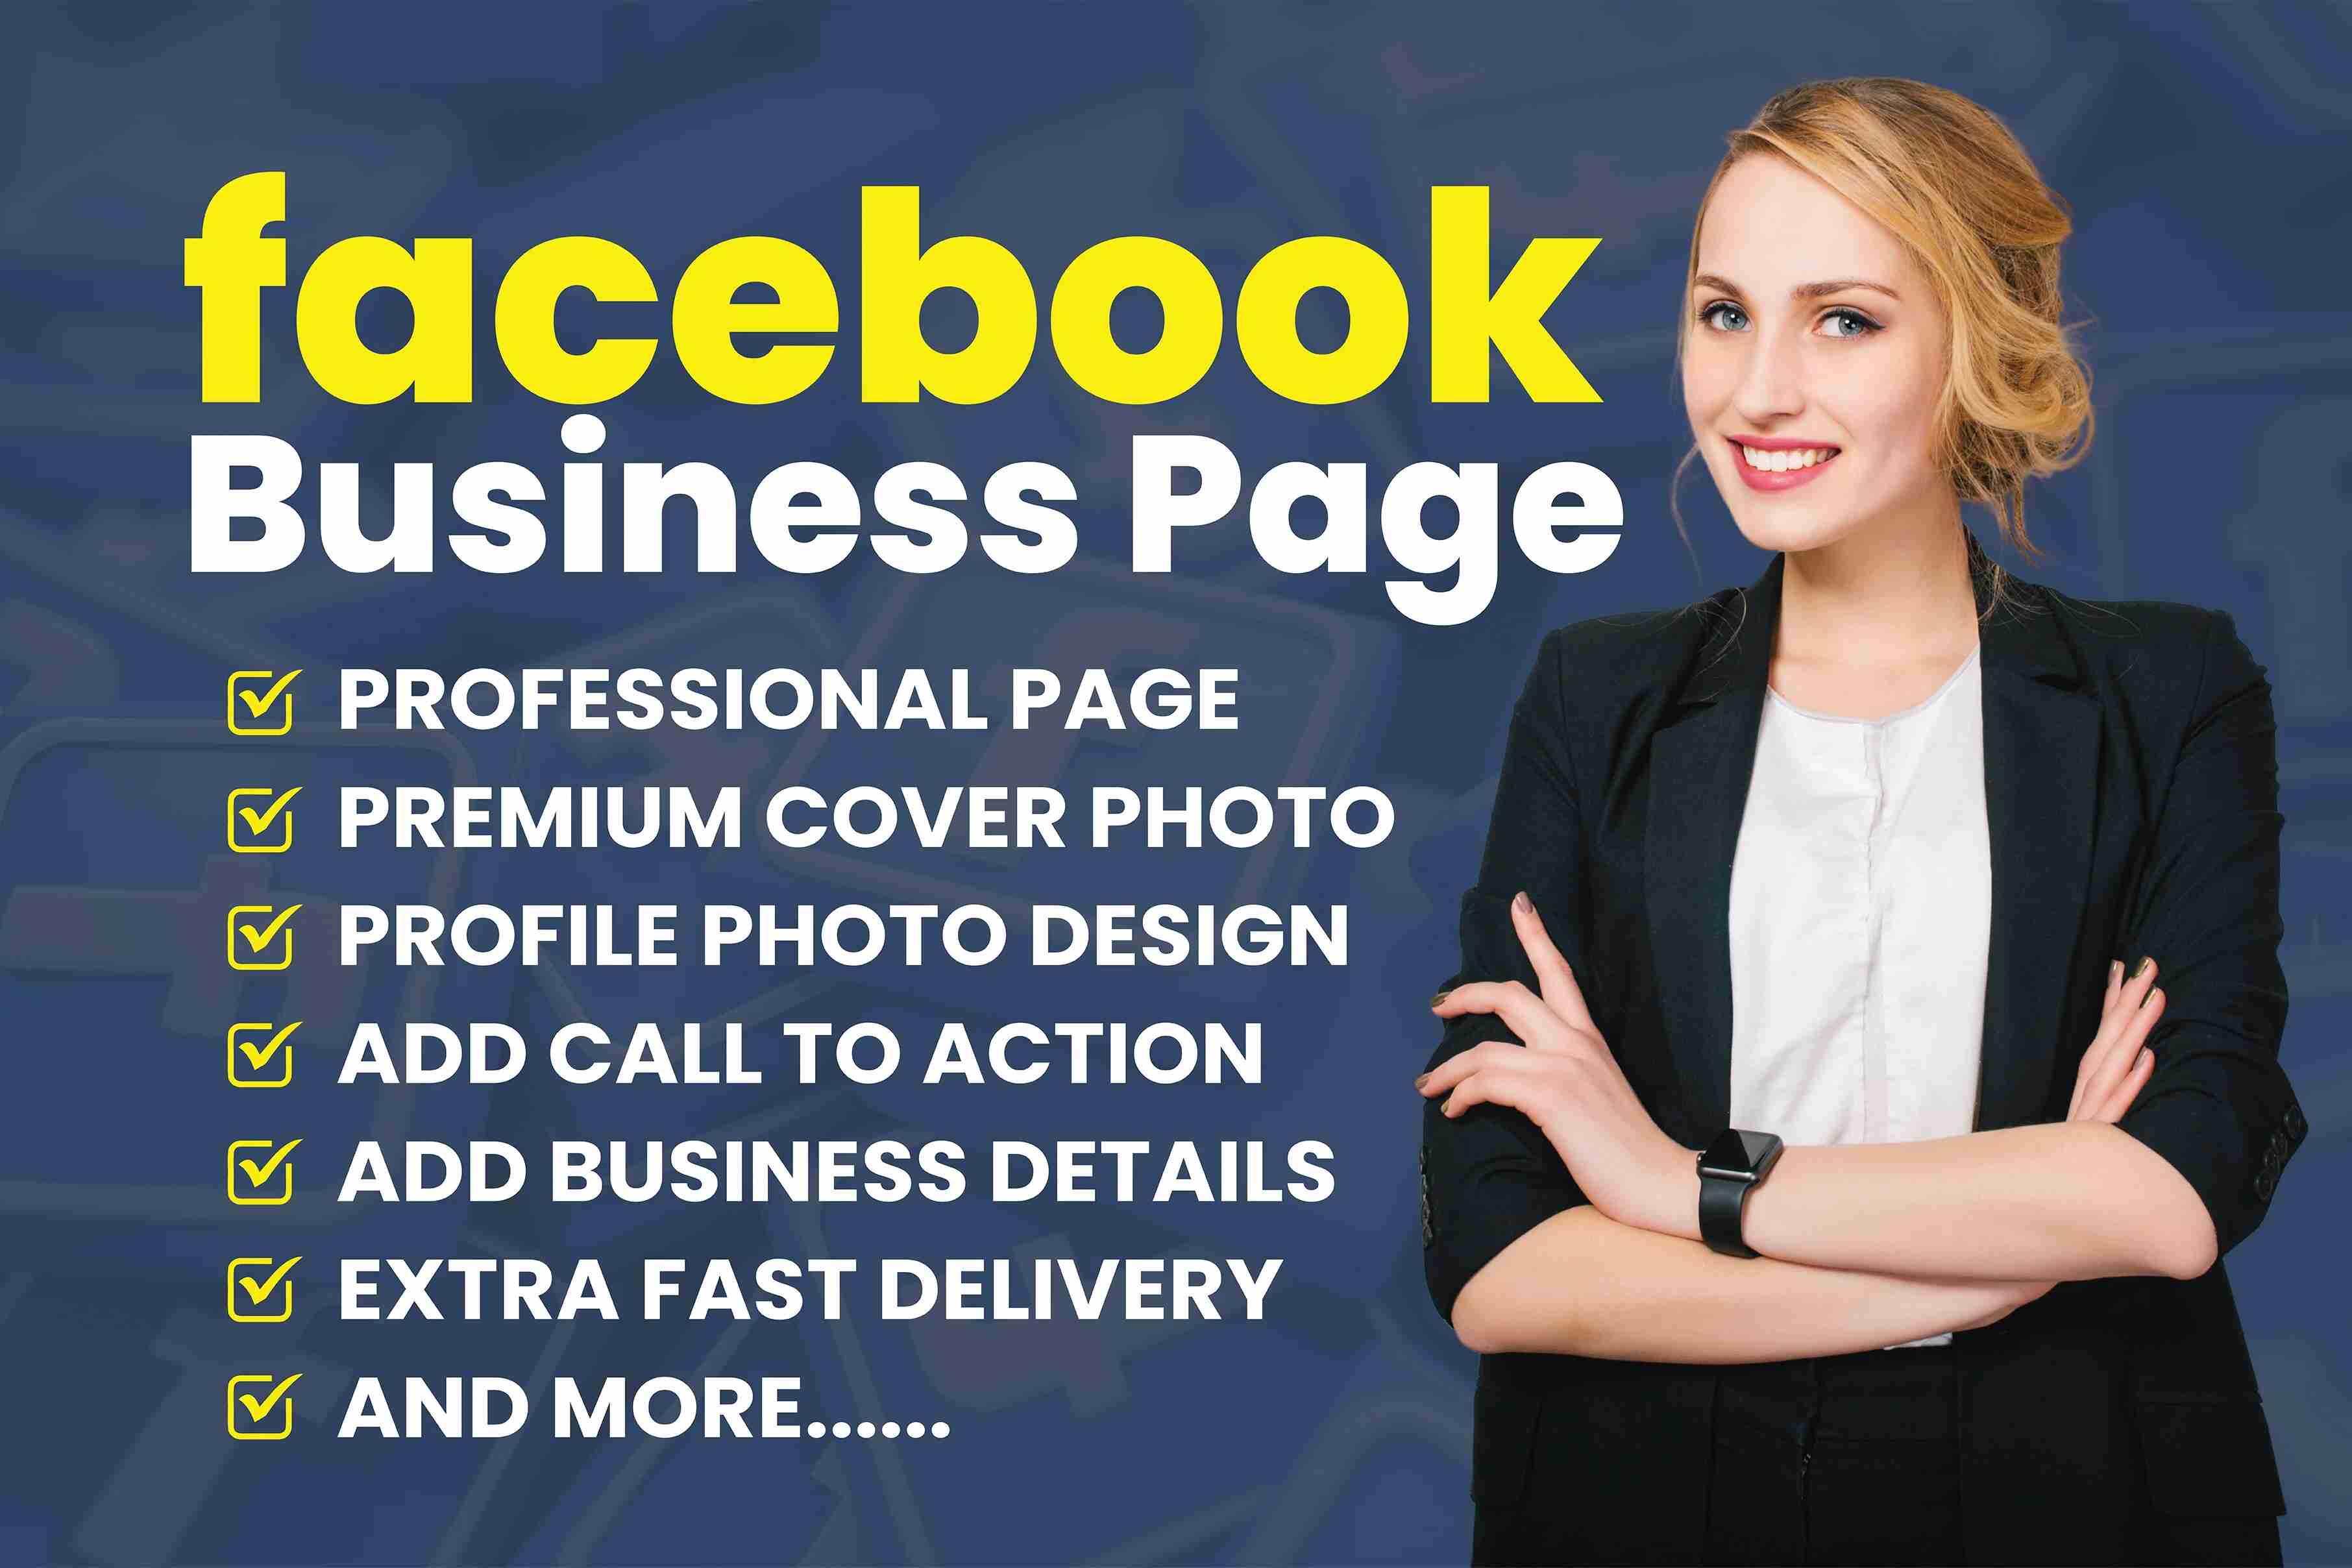 I will create and set up social media business accounts and pages